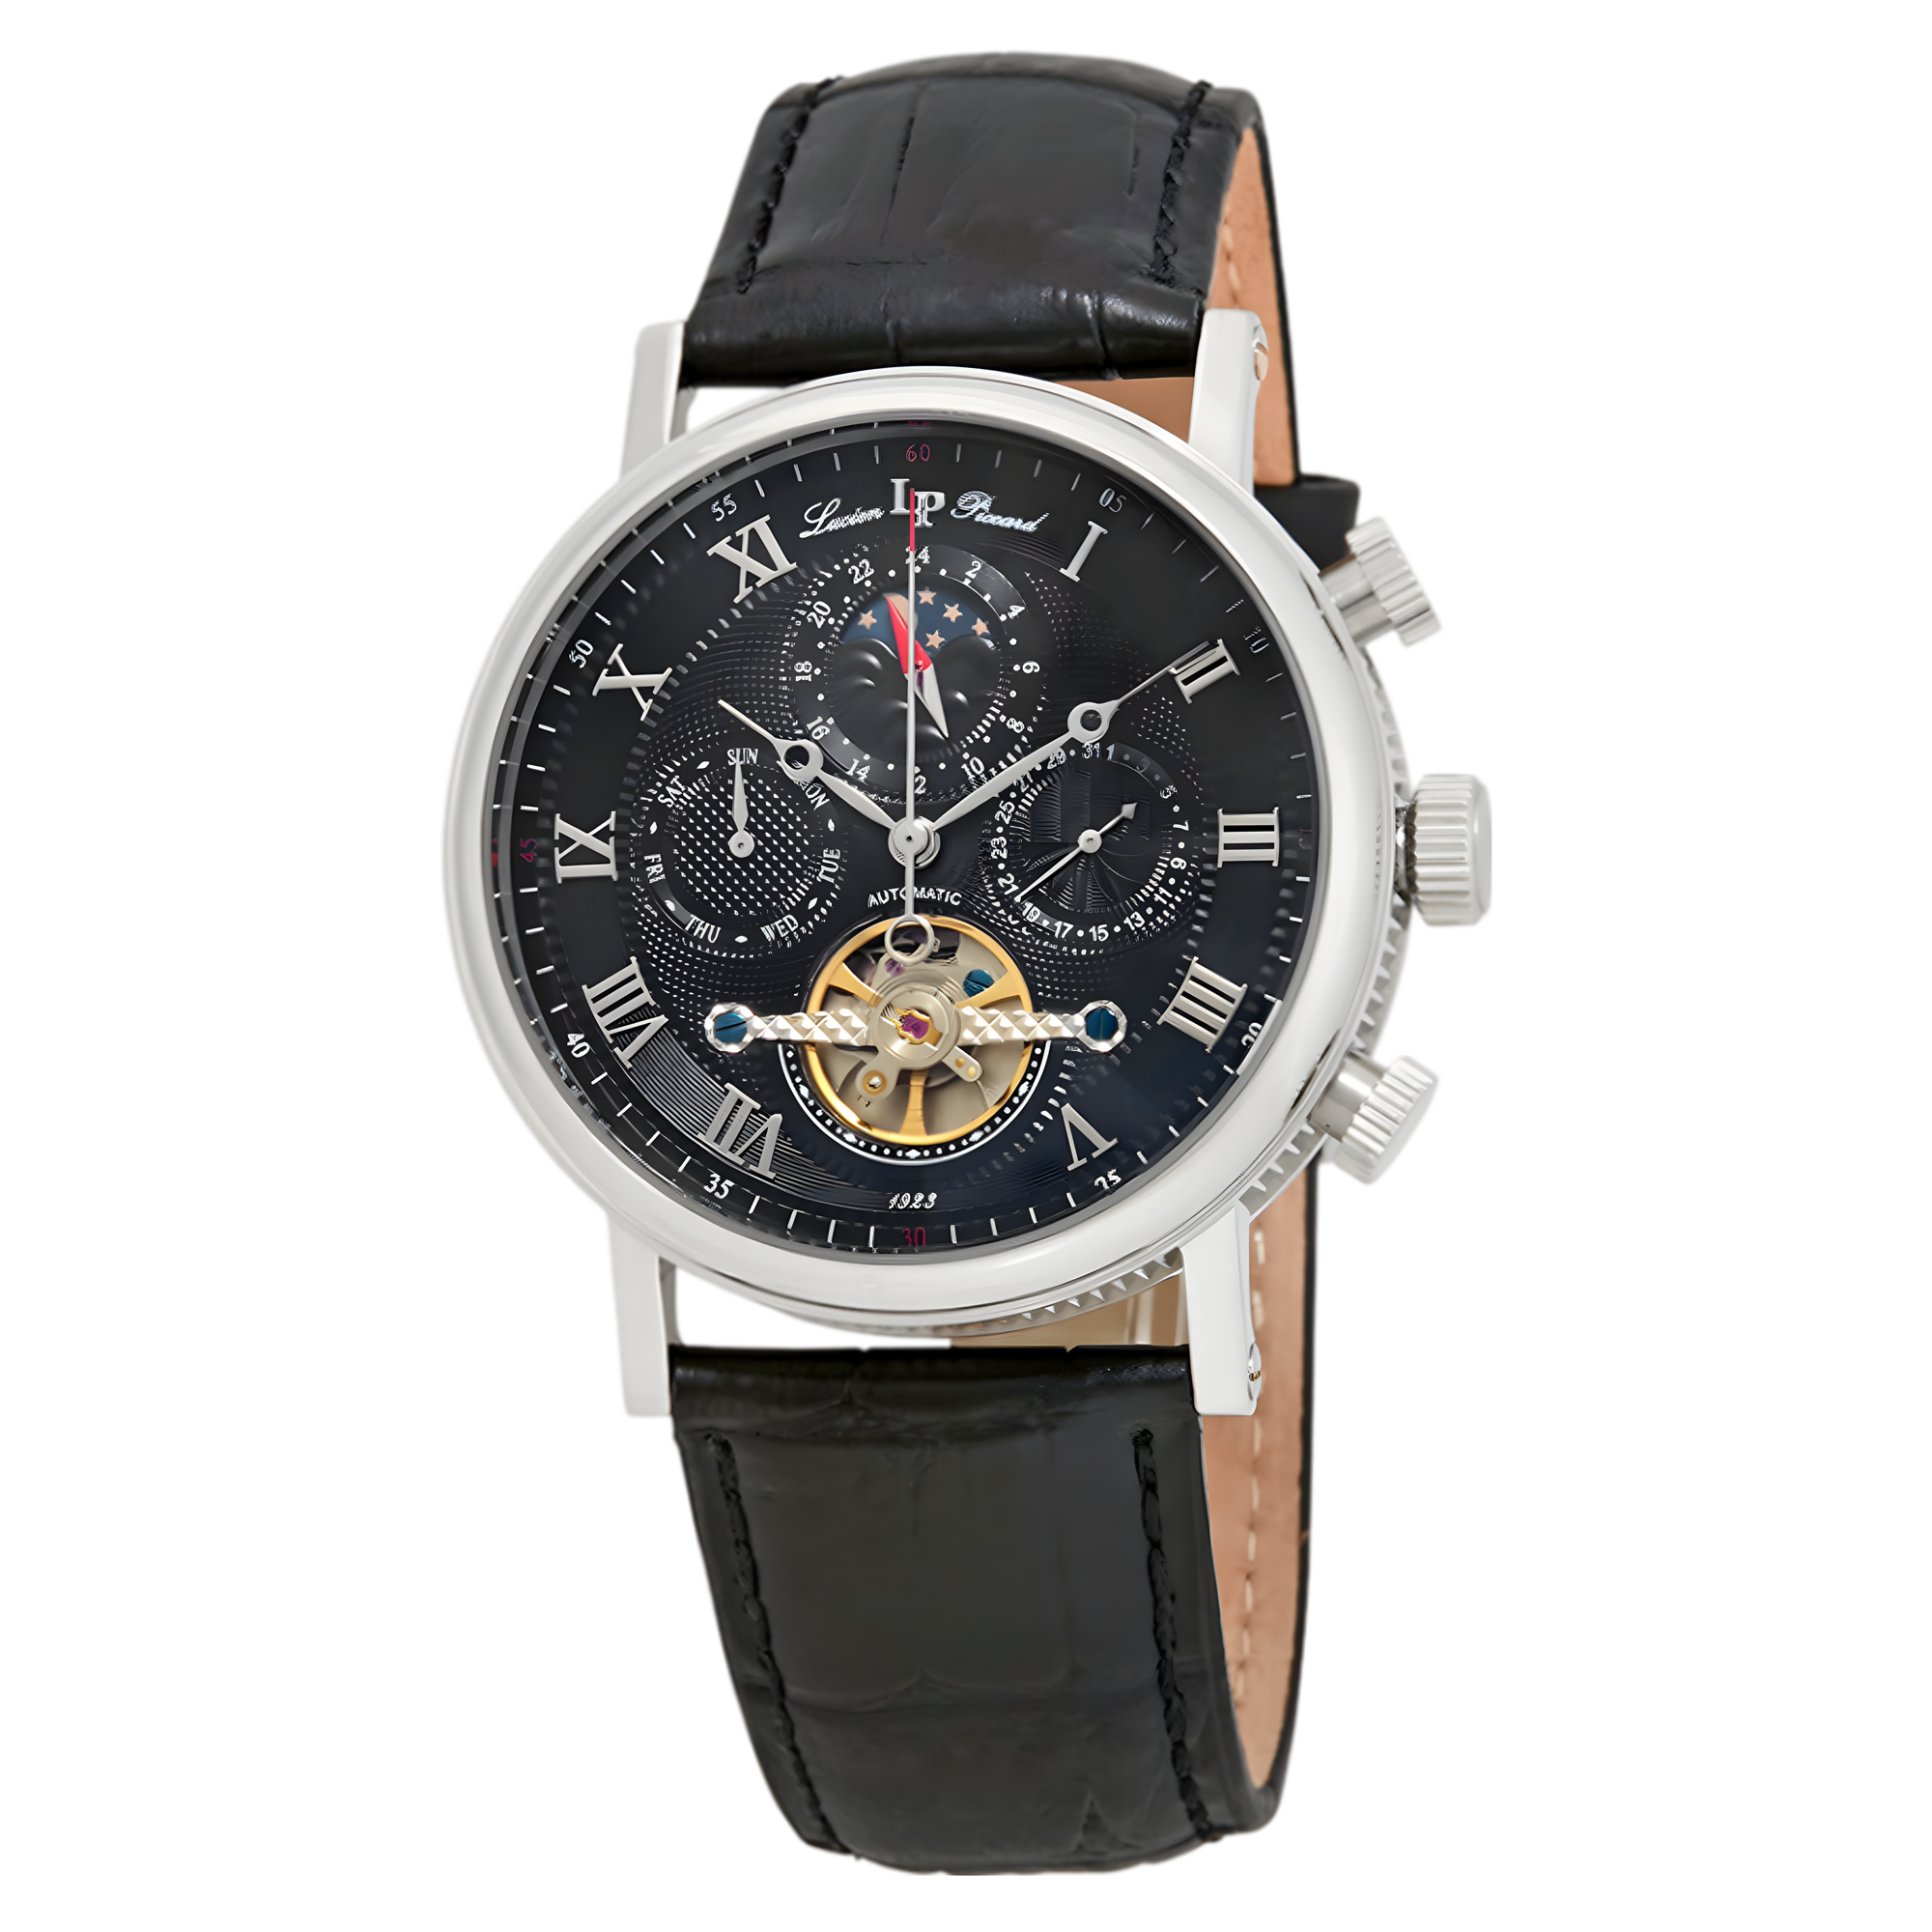 LUCIEN PICCARD Lucien Piccard Ottoman Day-Night Automatic Men's Watch LP-40012A-01